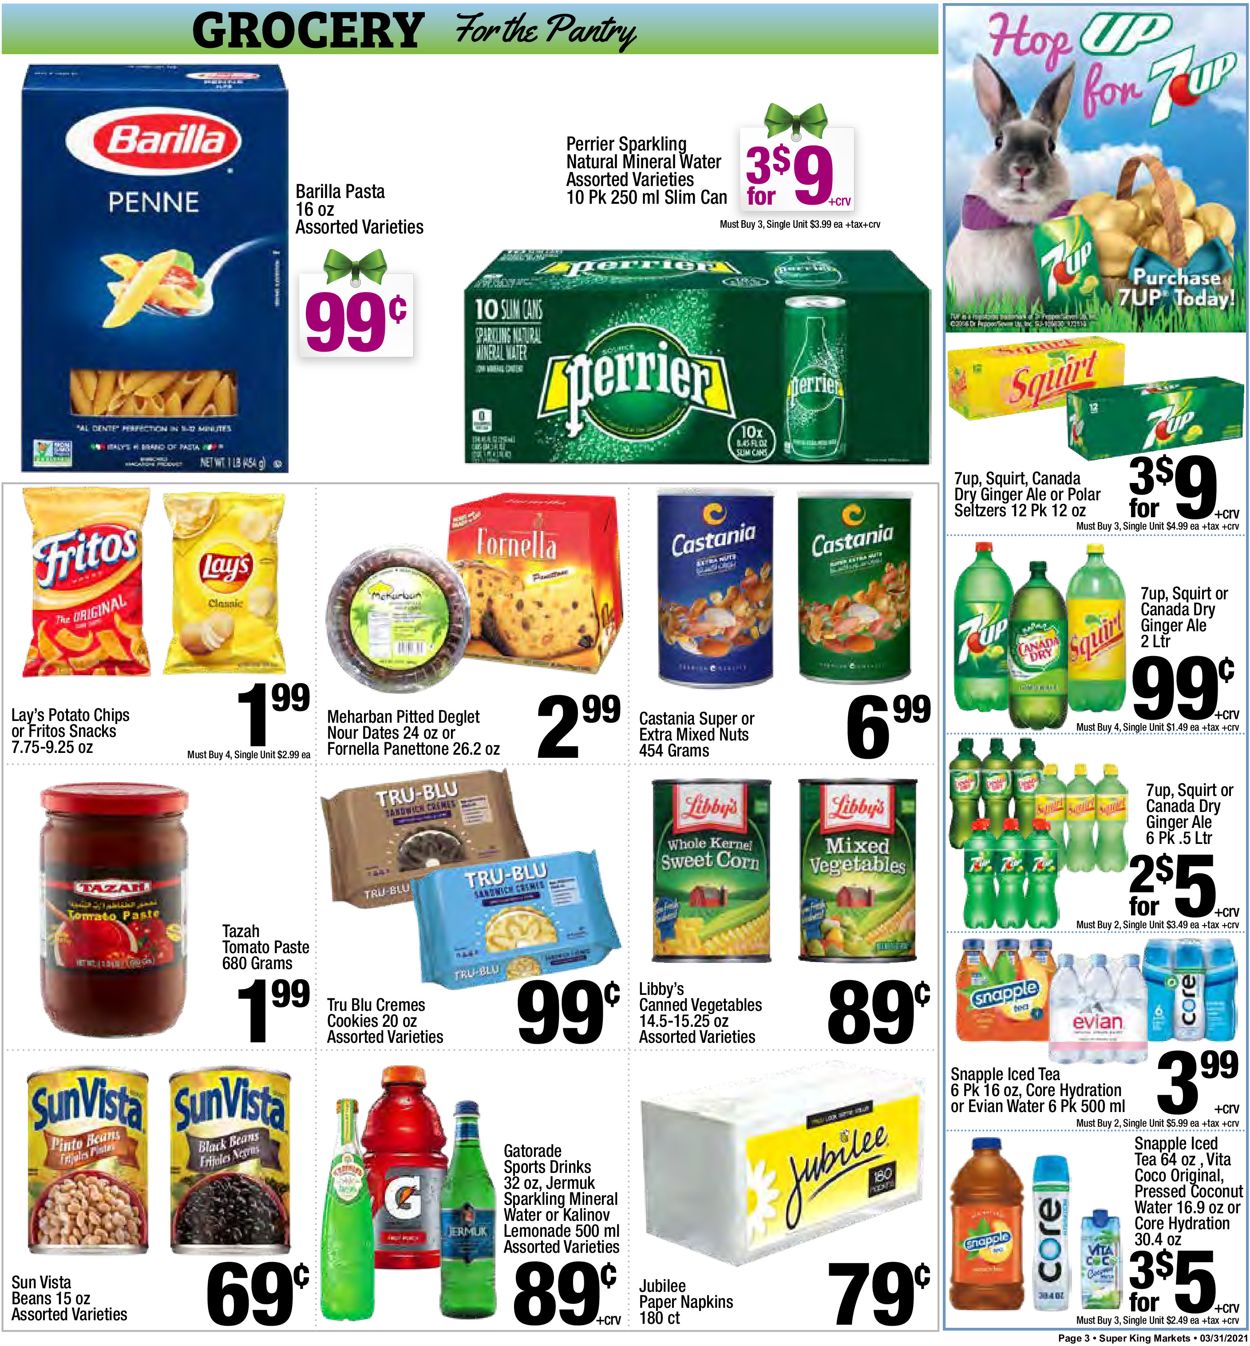 Catalogue Super King Market Easter 2021 ad from 03/31/2021